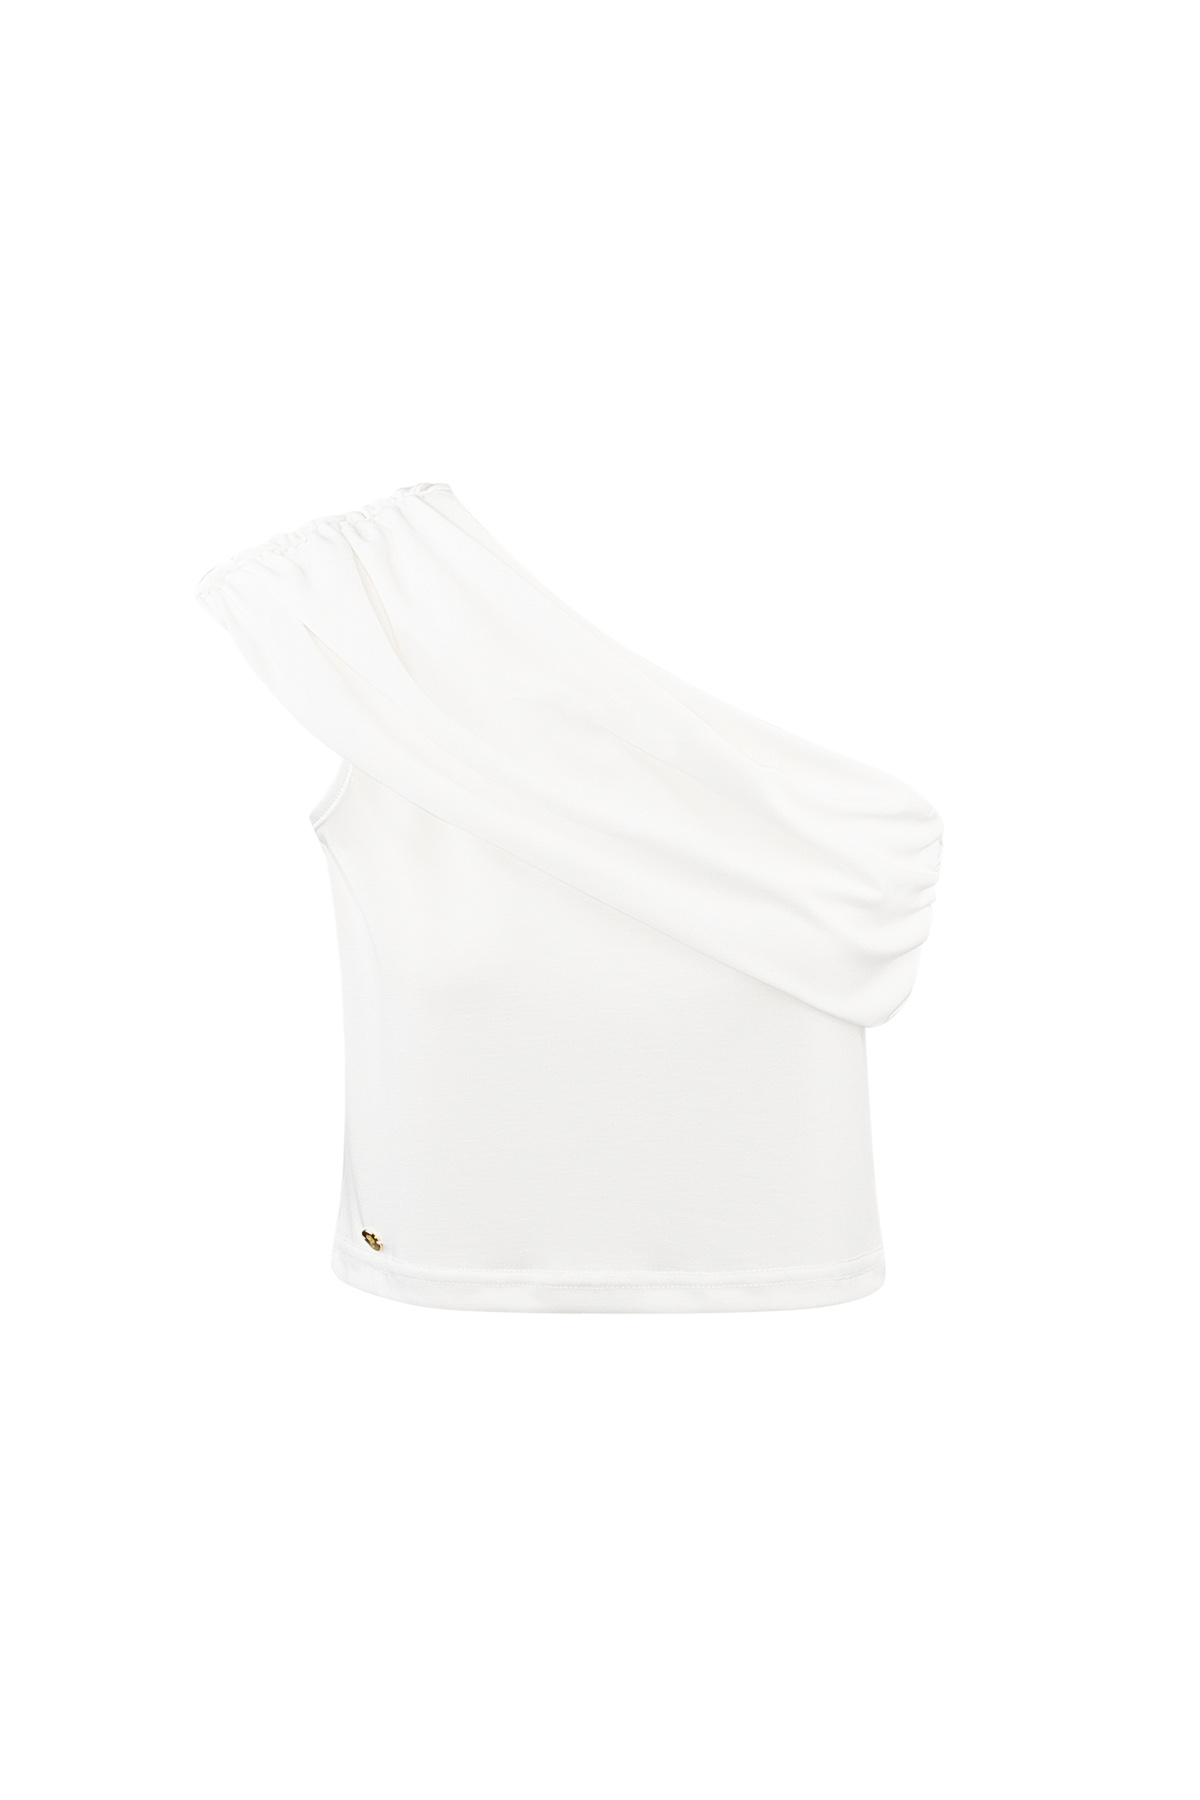 One shoulder classic top - white